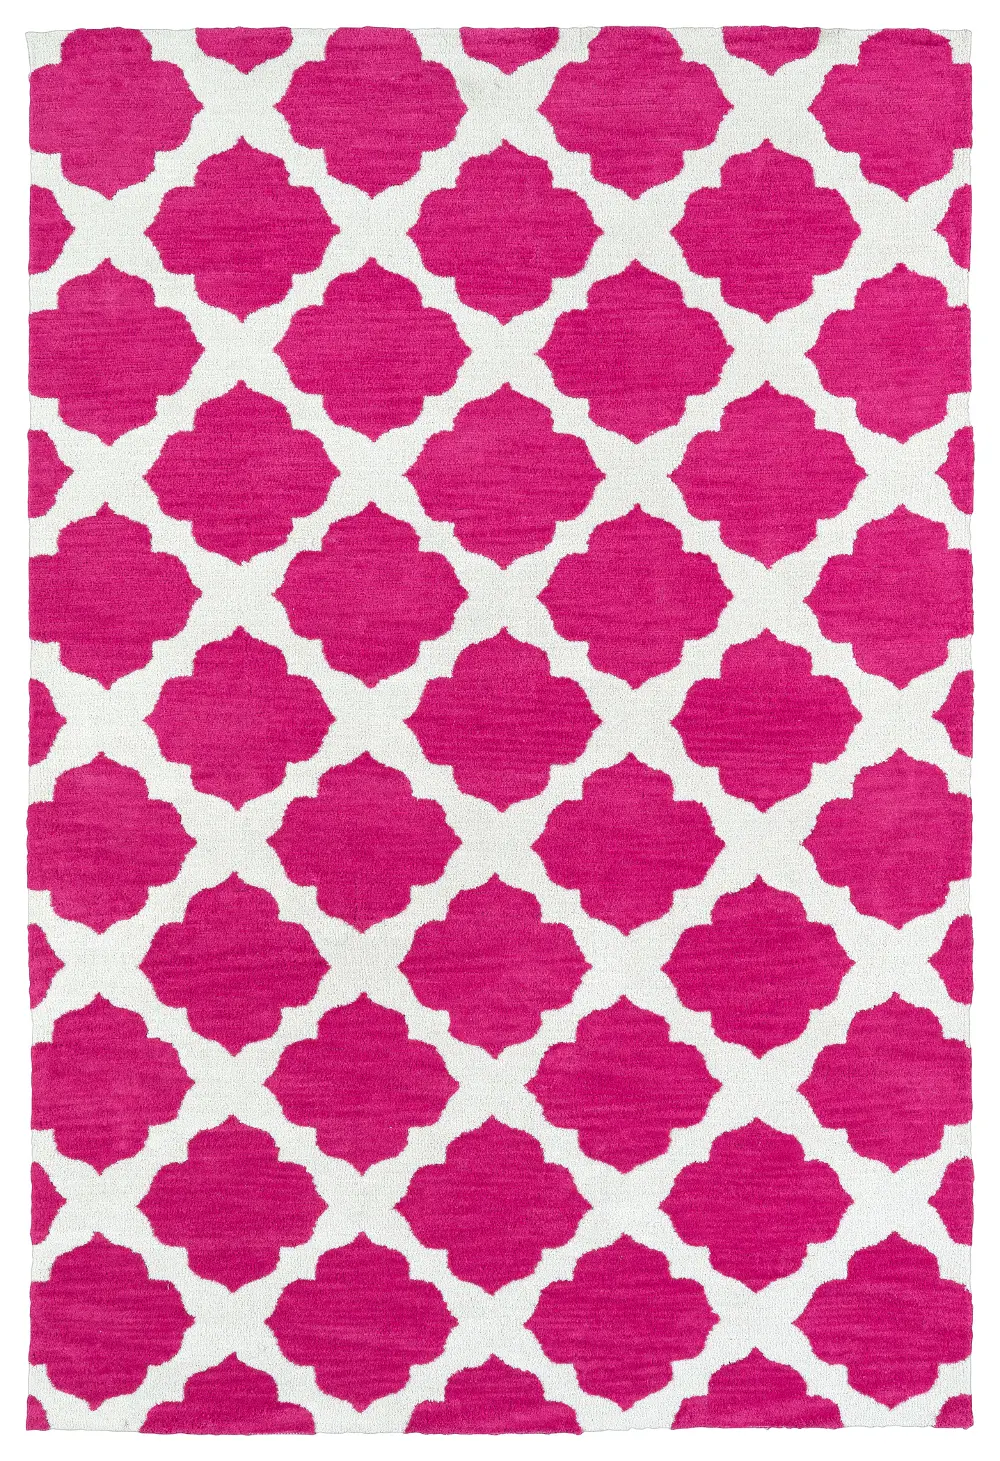 4 x 6 Small Pink and Ivory Area Rug - Lily & Liam-1